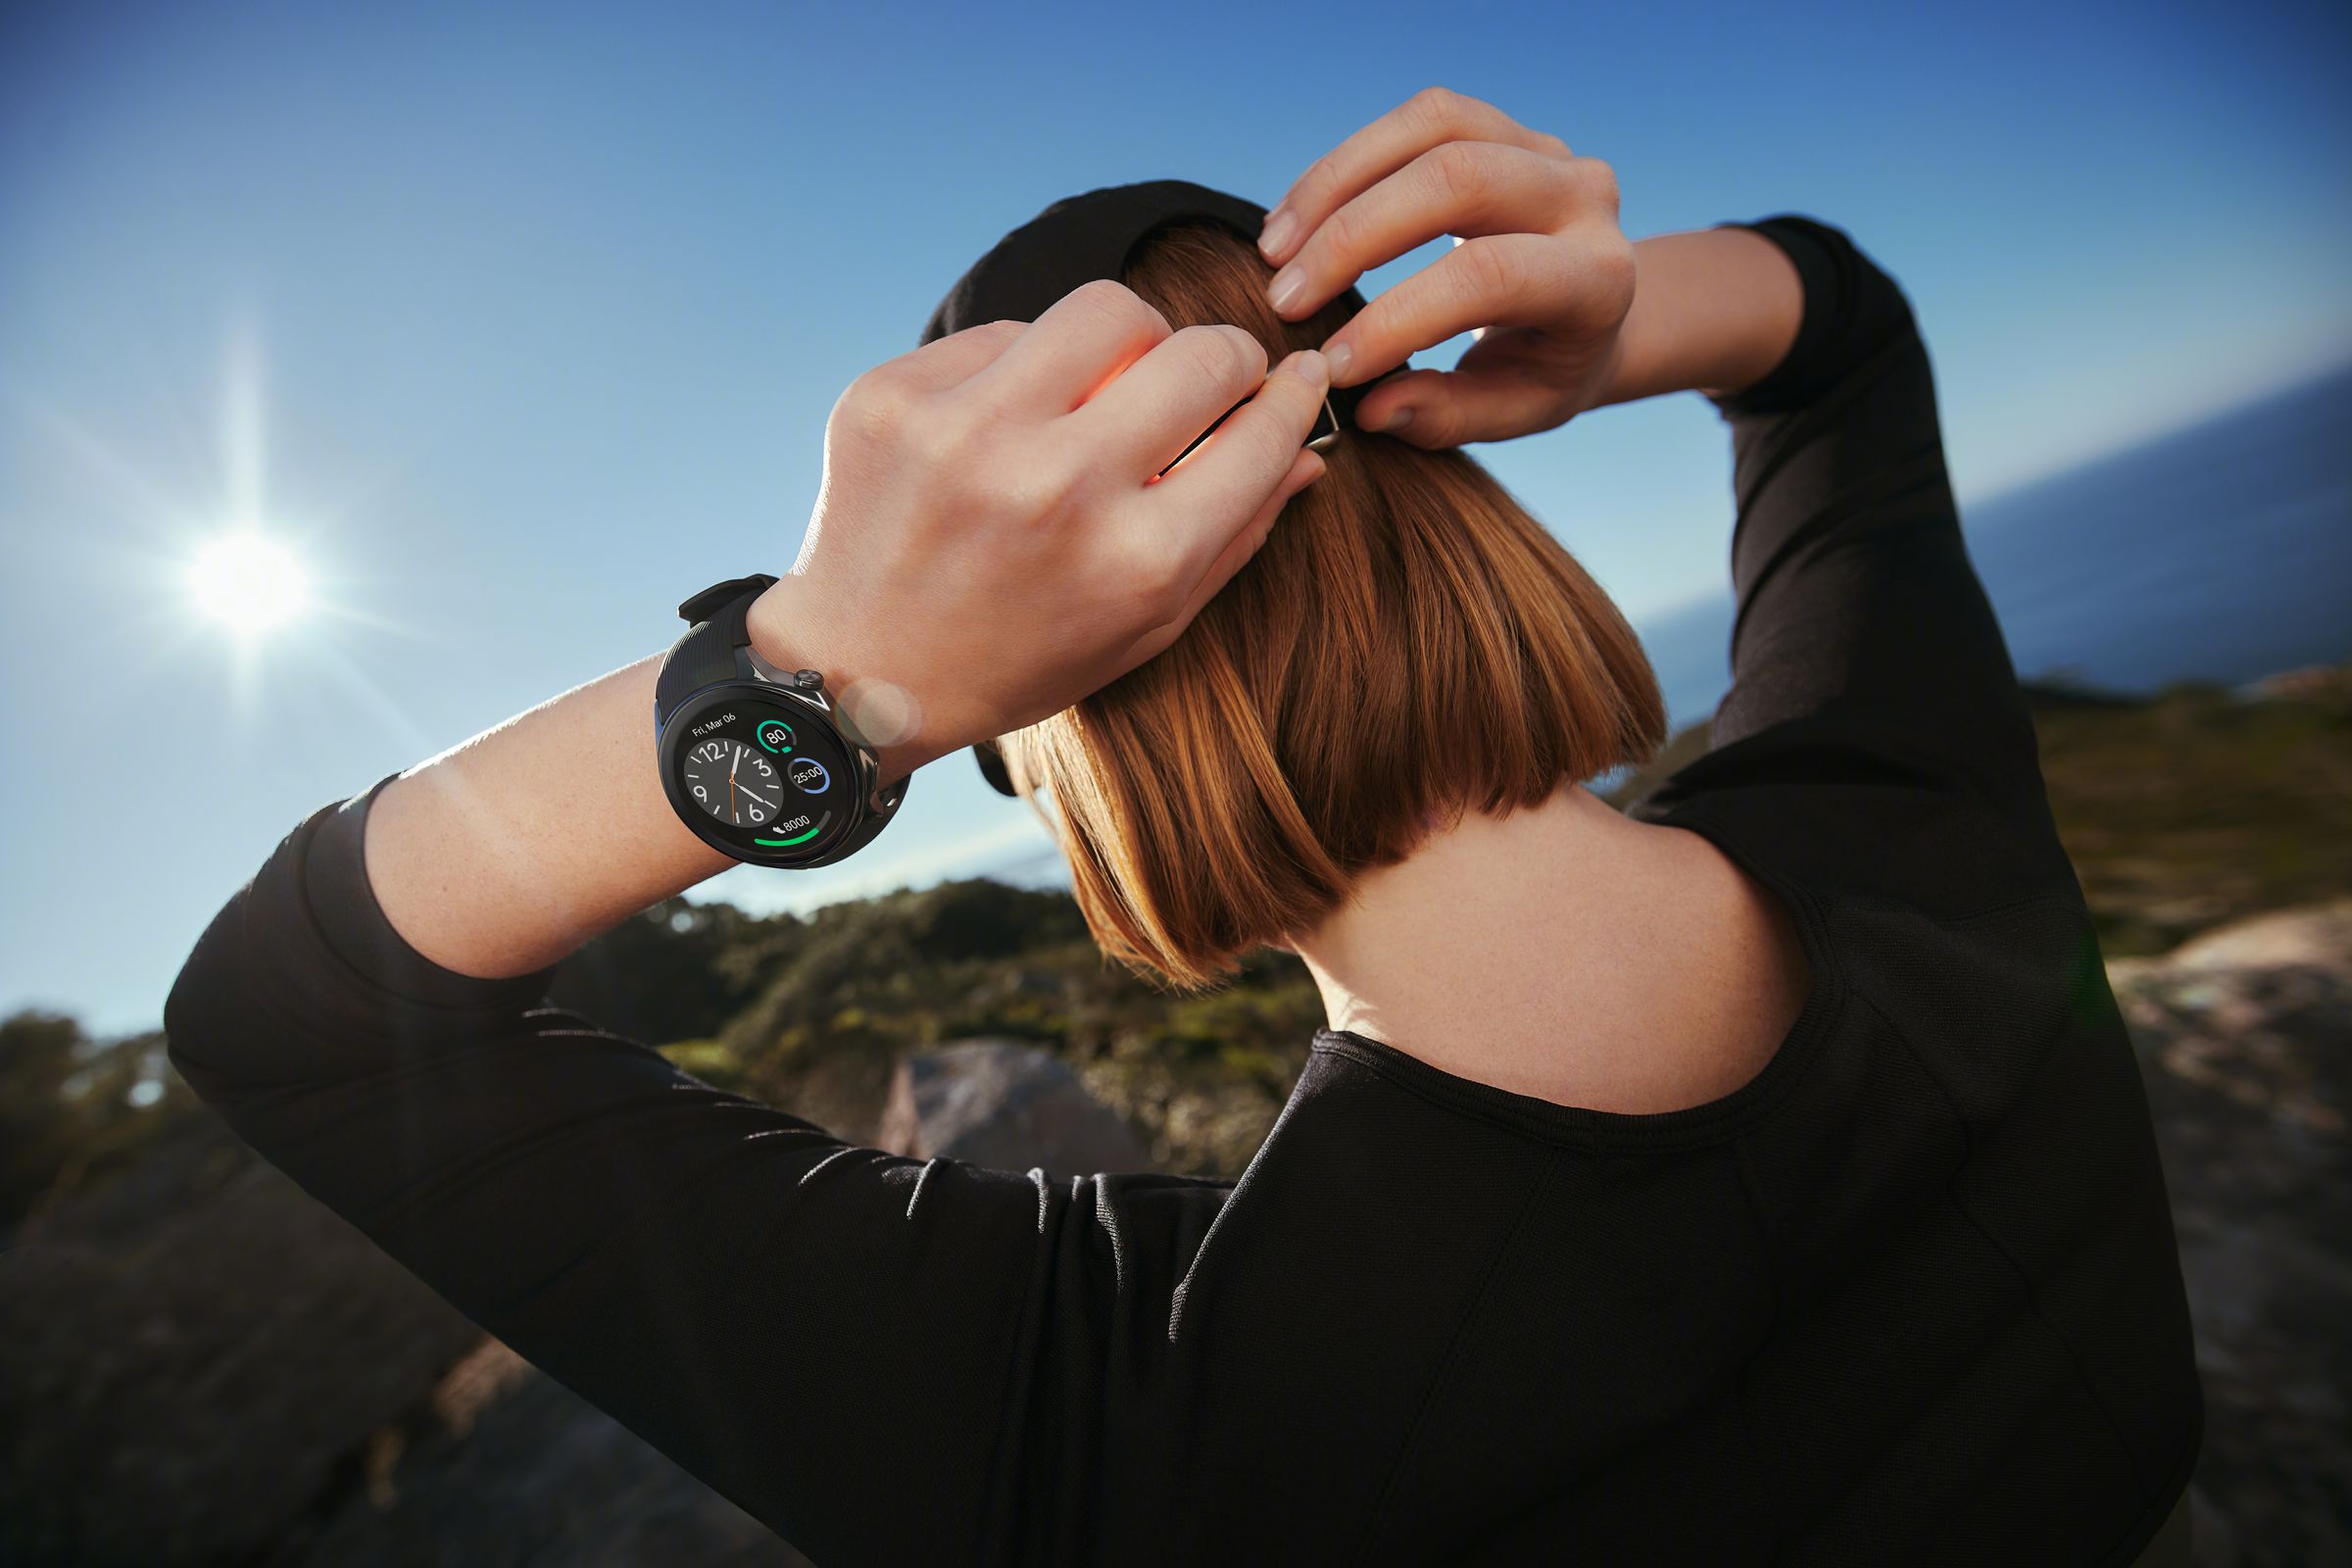 A person wearing a OnePlus Watch 2 while tying their hair